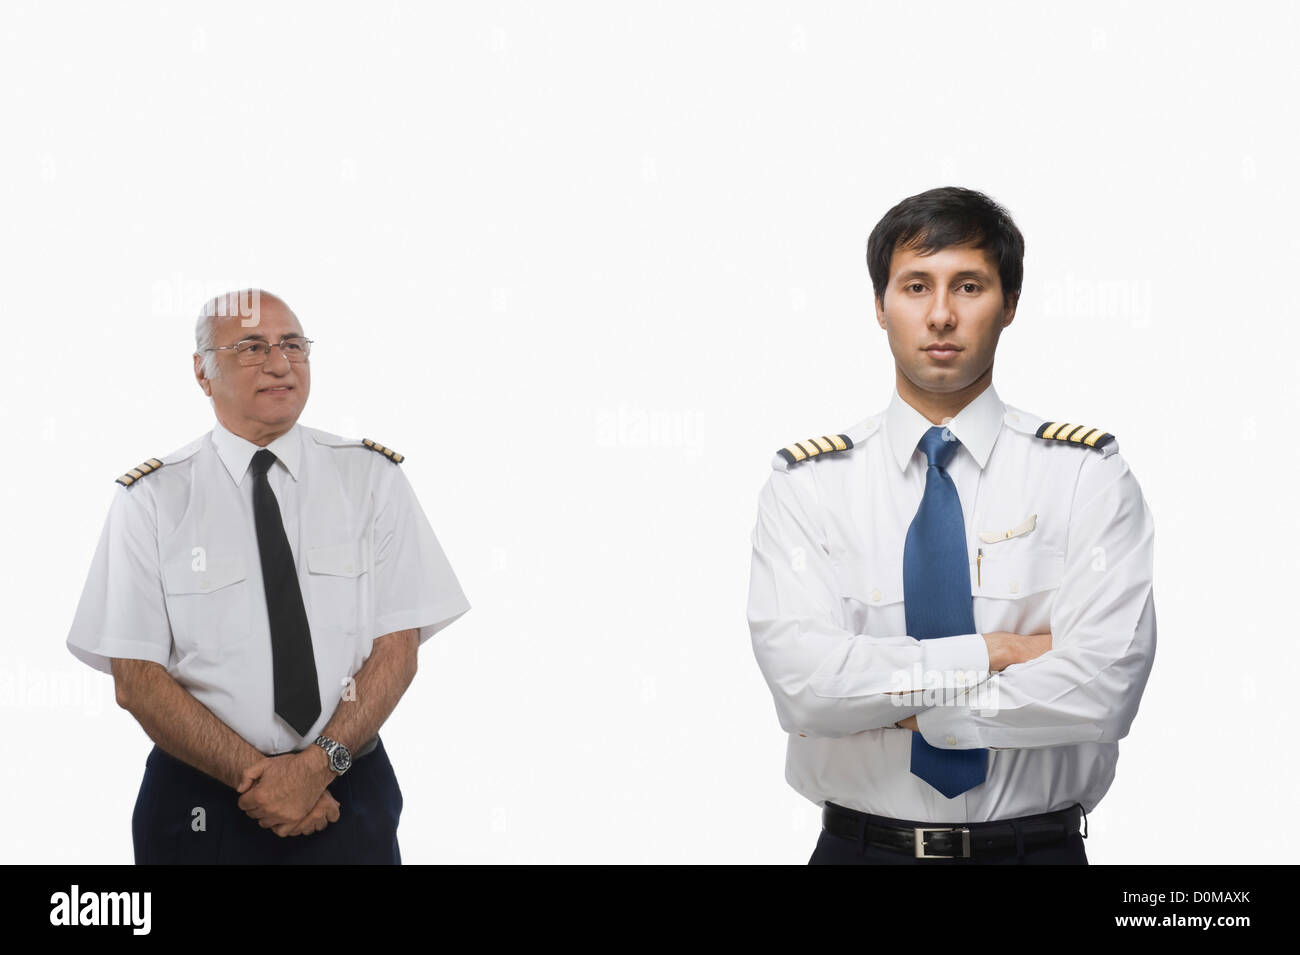 Two pilots showing different facial expression Stock Photo